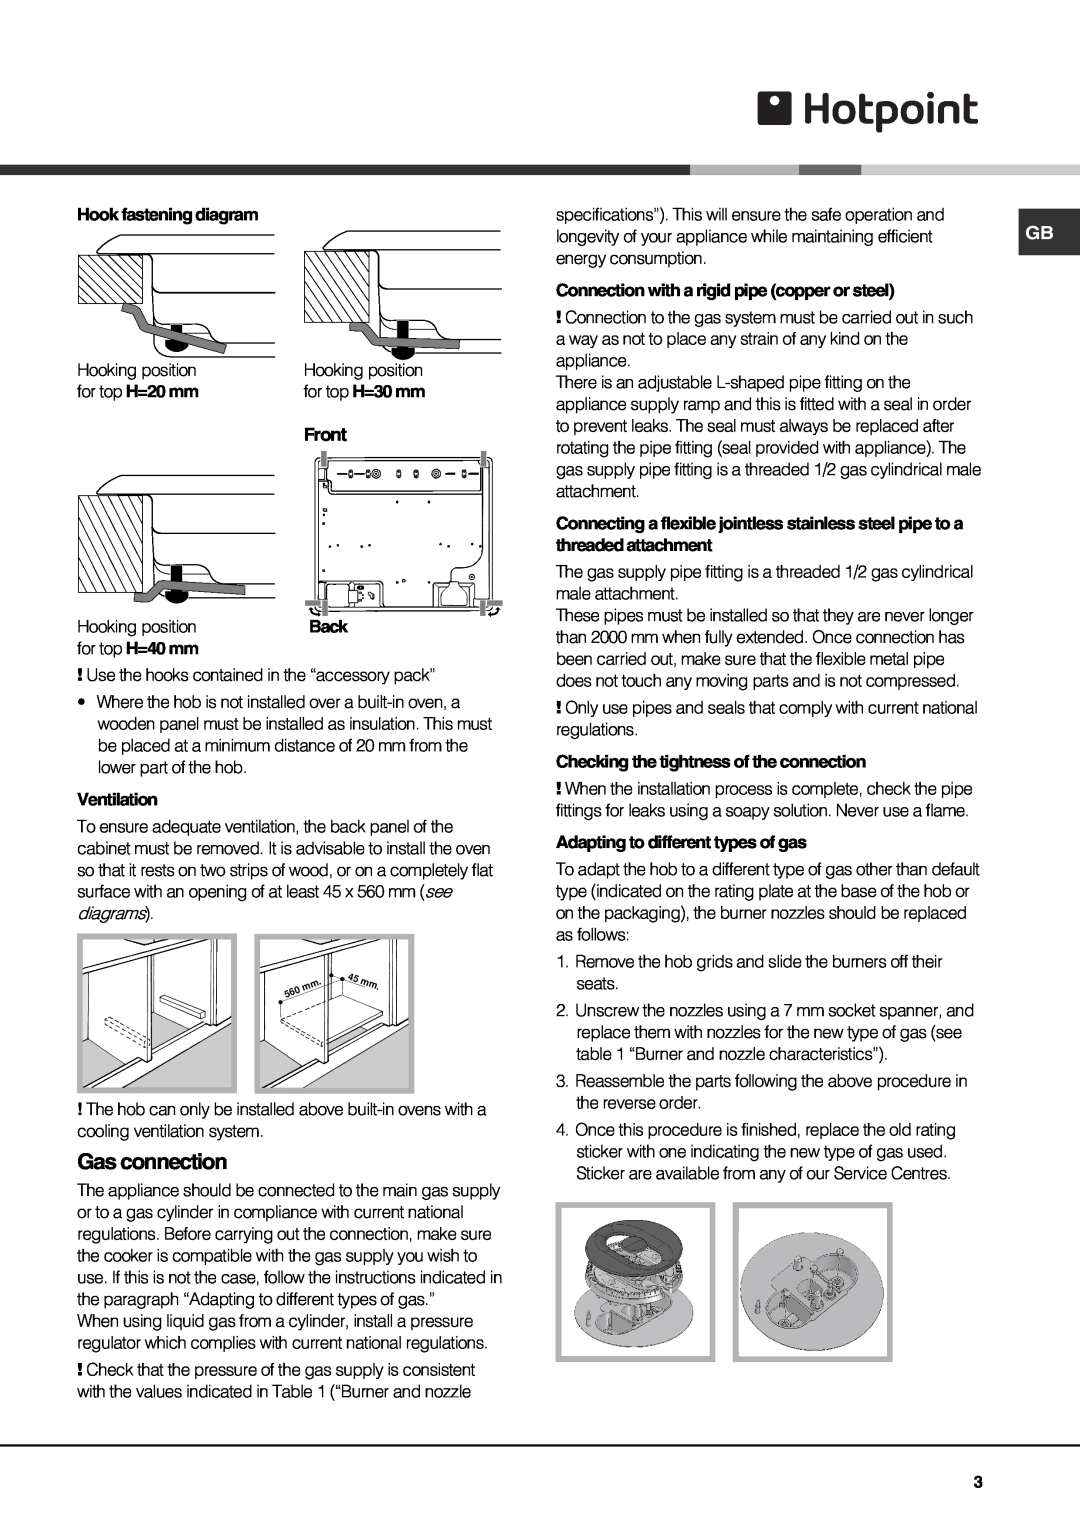 Hotpoint GE750DX operating instructions Gas connection 